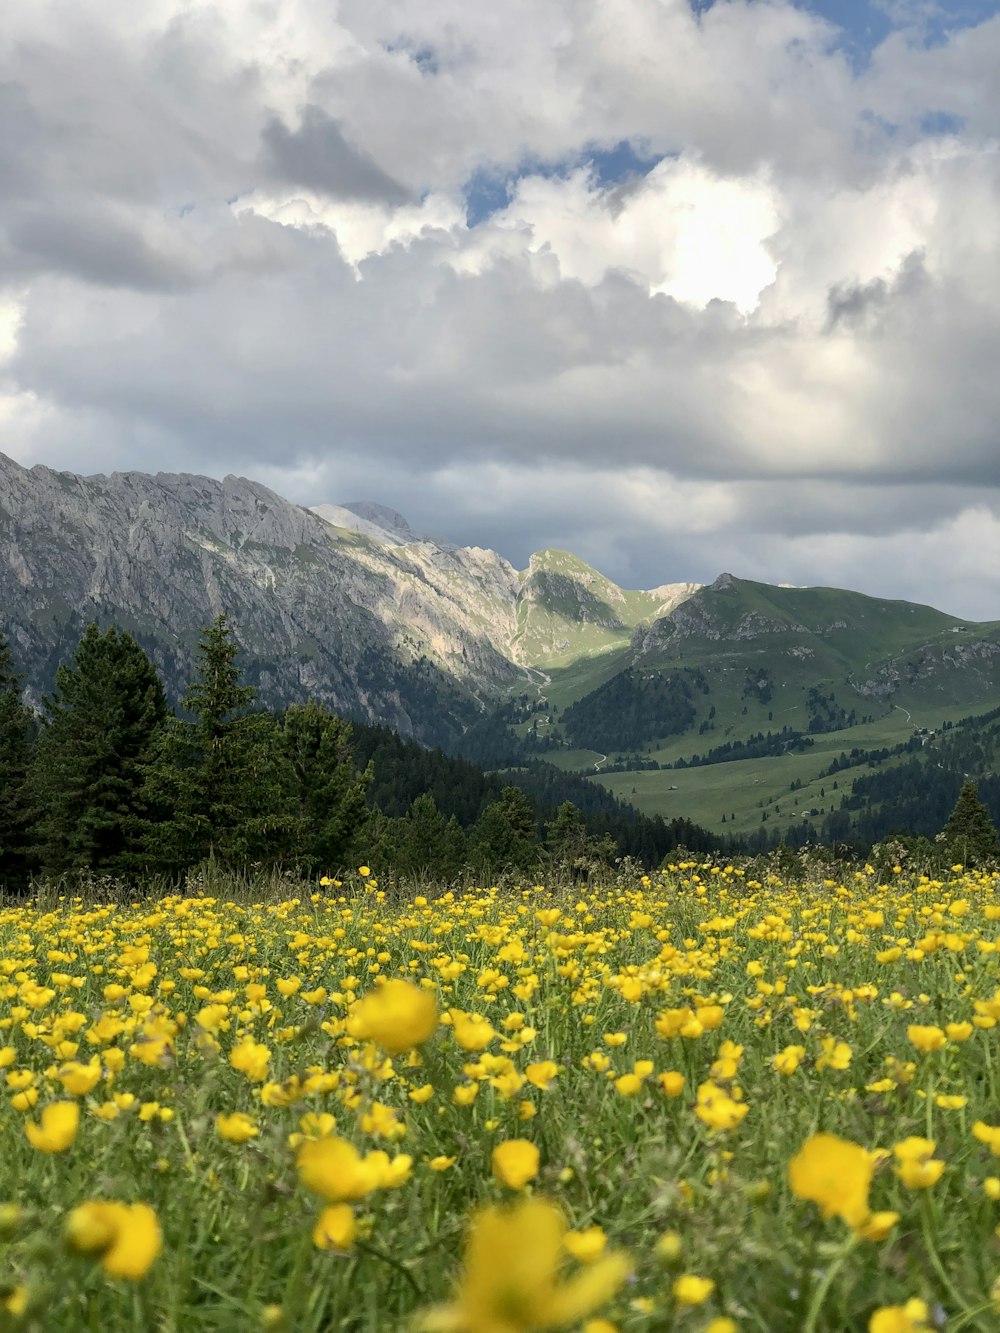 yellow flower field near green mountains under white clouds during daytime